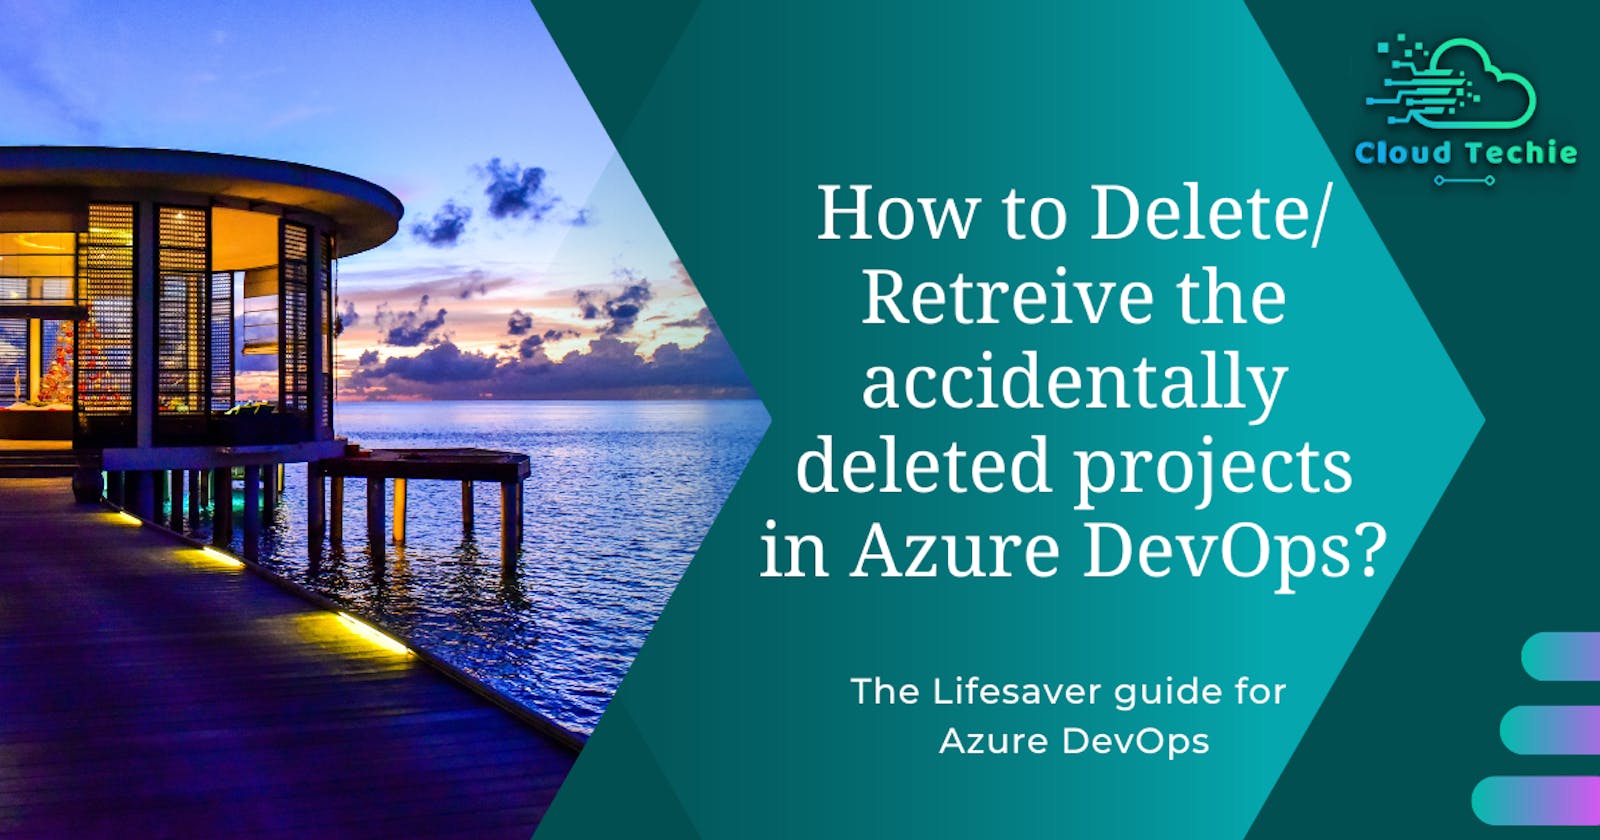 How to Delete/ Retrieve the accidentally deleted projects in Azure DevOps?